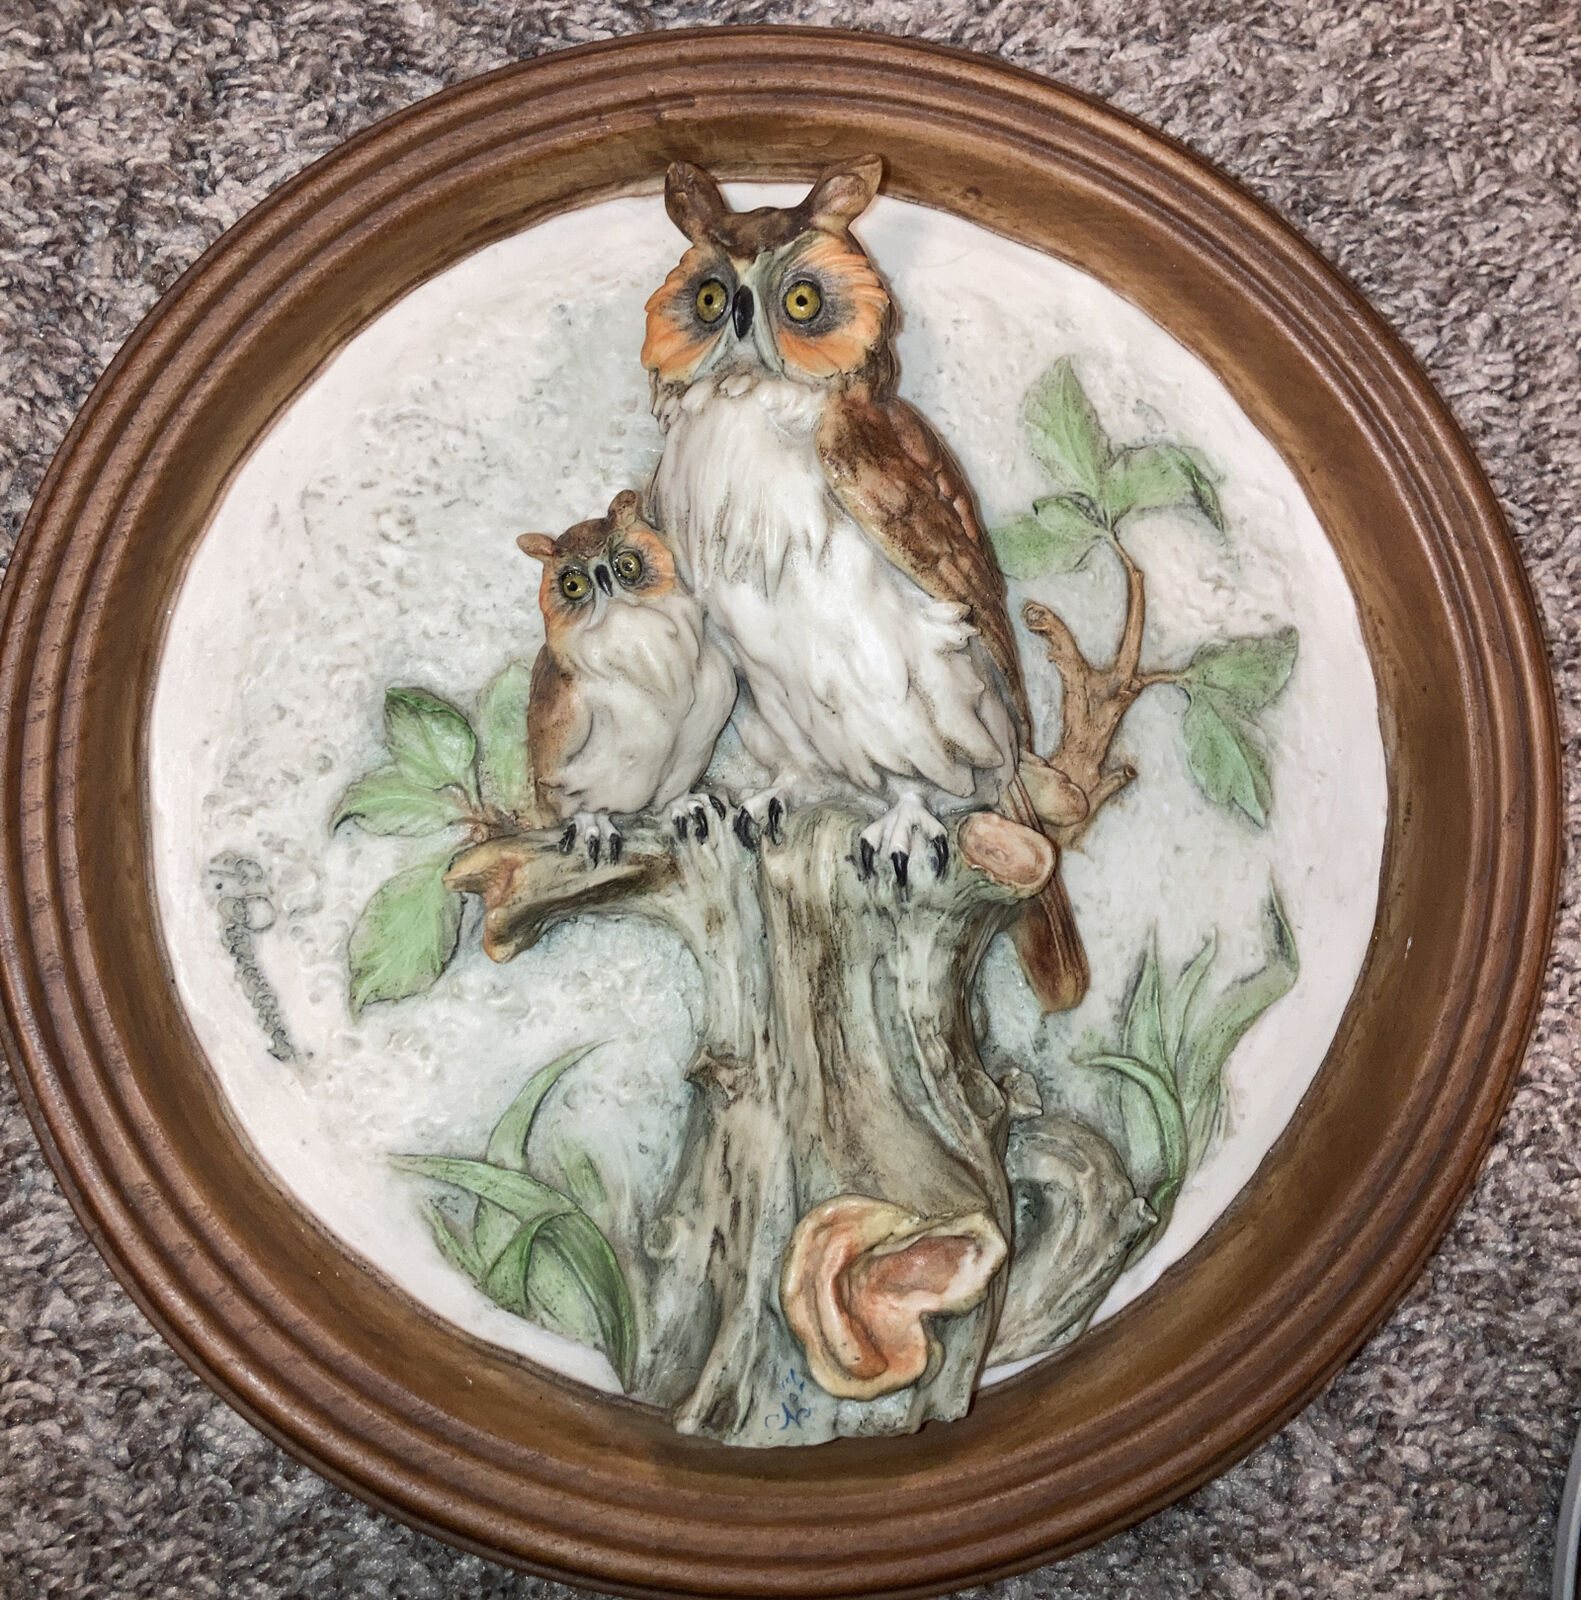 Great Horned Owl 3D Ceramic Wall Art .Made in Italy , Artist Signed G. Quuaui